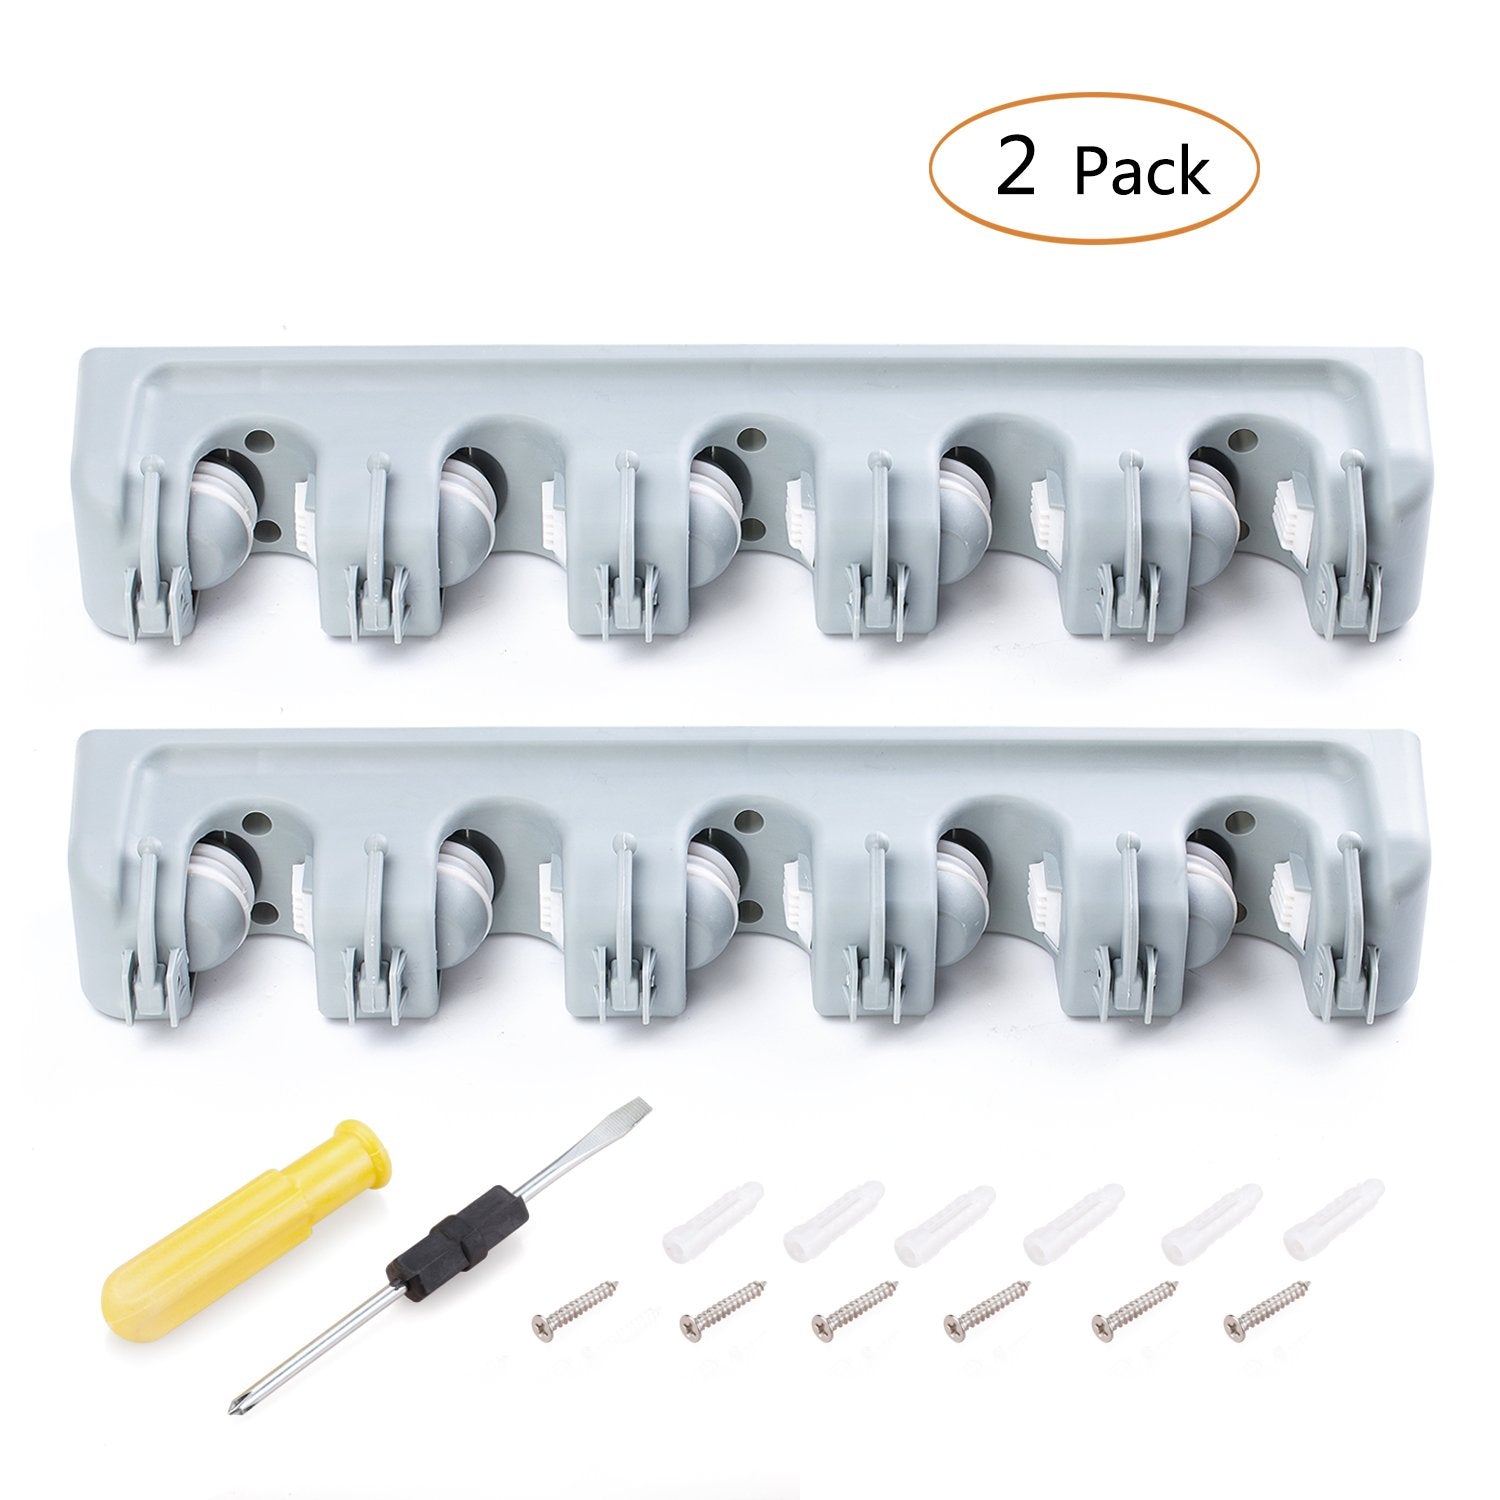 Mop and Broom Holder Organizer Key Rack Towel Hooks Wall Closet Mounted with 5 Ball Slots and 6 Hooks Storage Rack Handle Grips for Kitchen Garden and Garage, Laundry Offices ( 2 Pack, Grey)